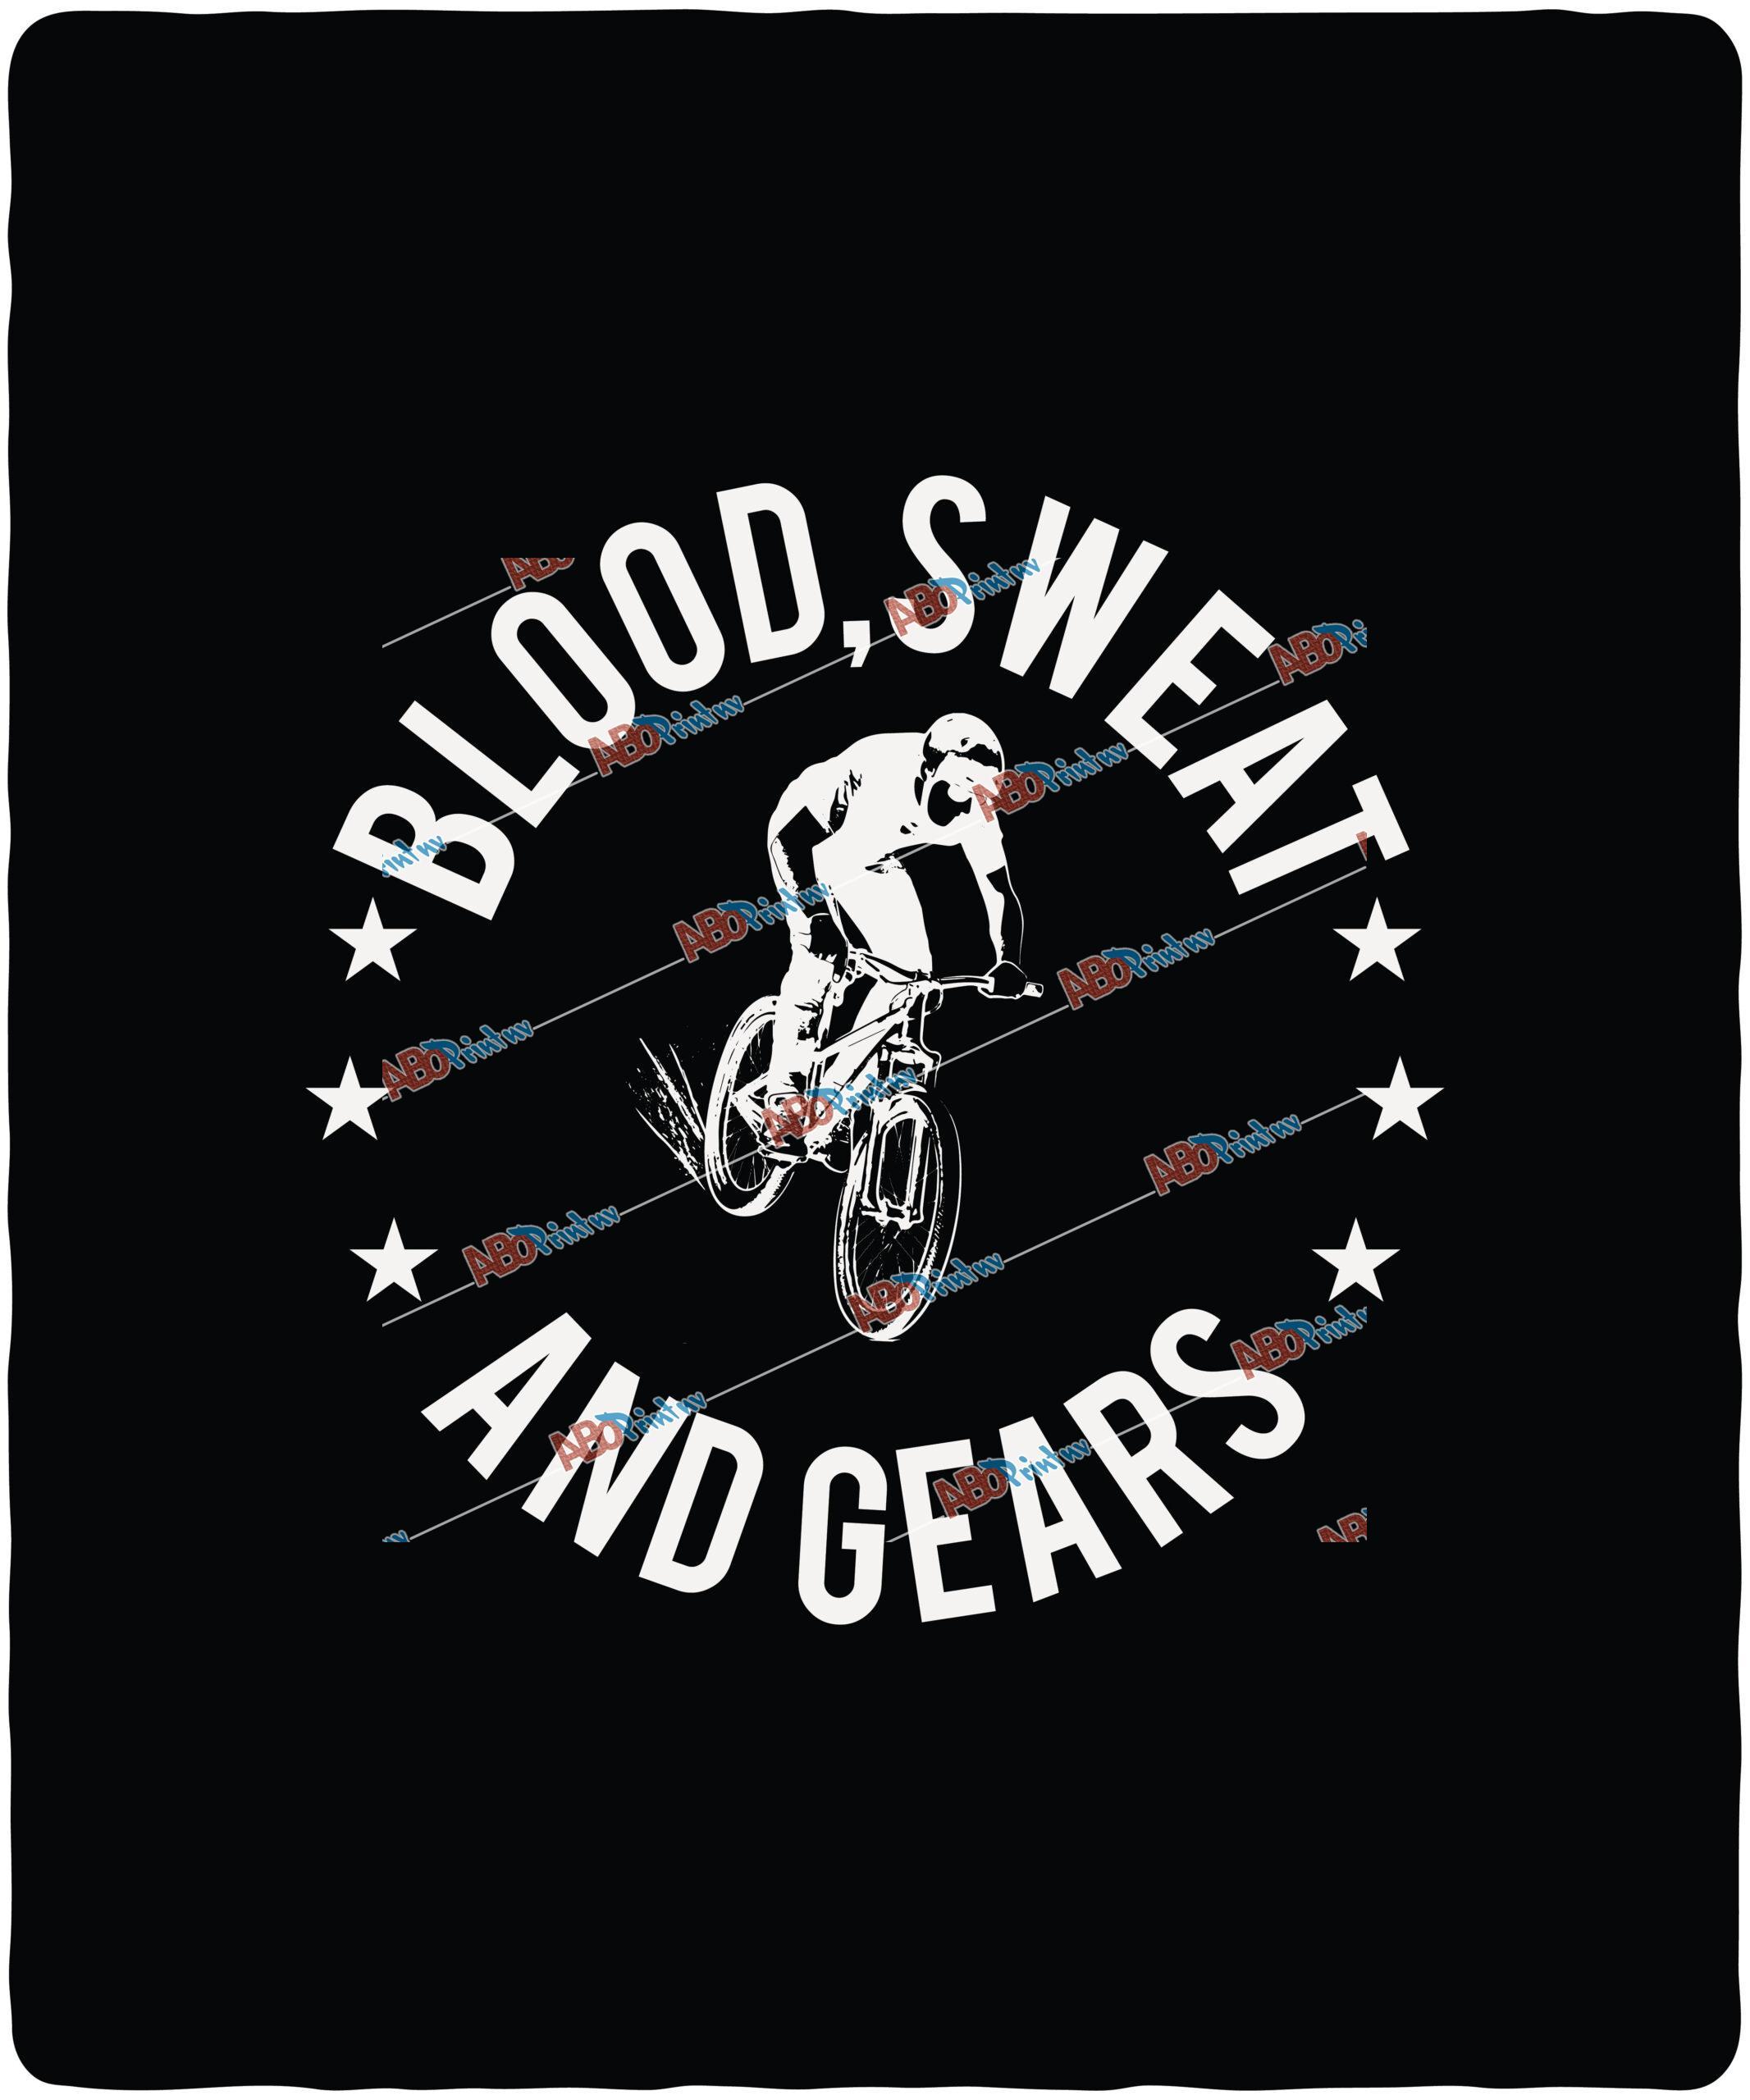 Blood,sweat and gears